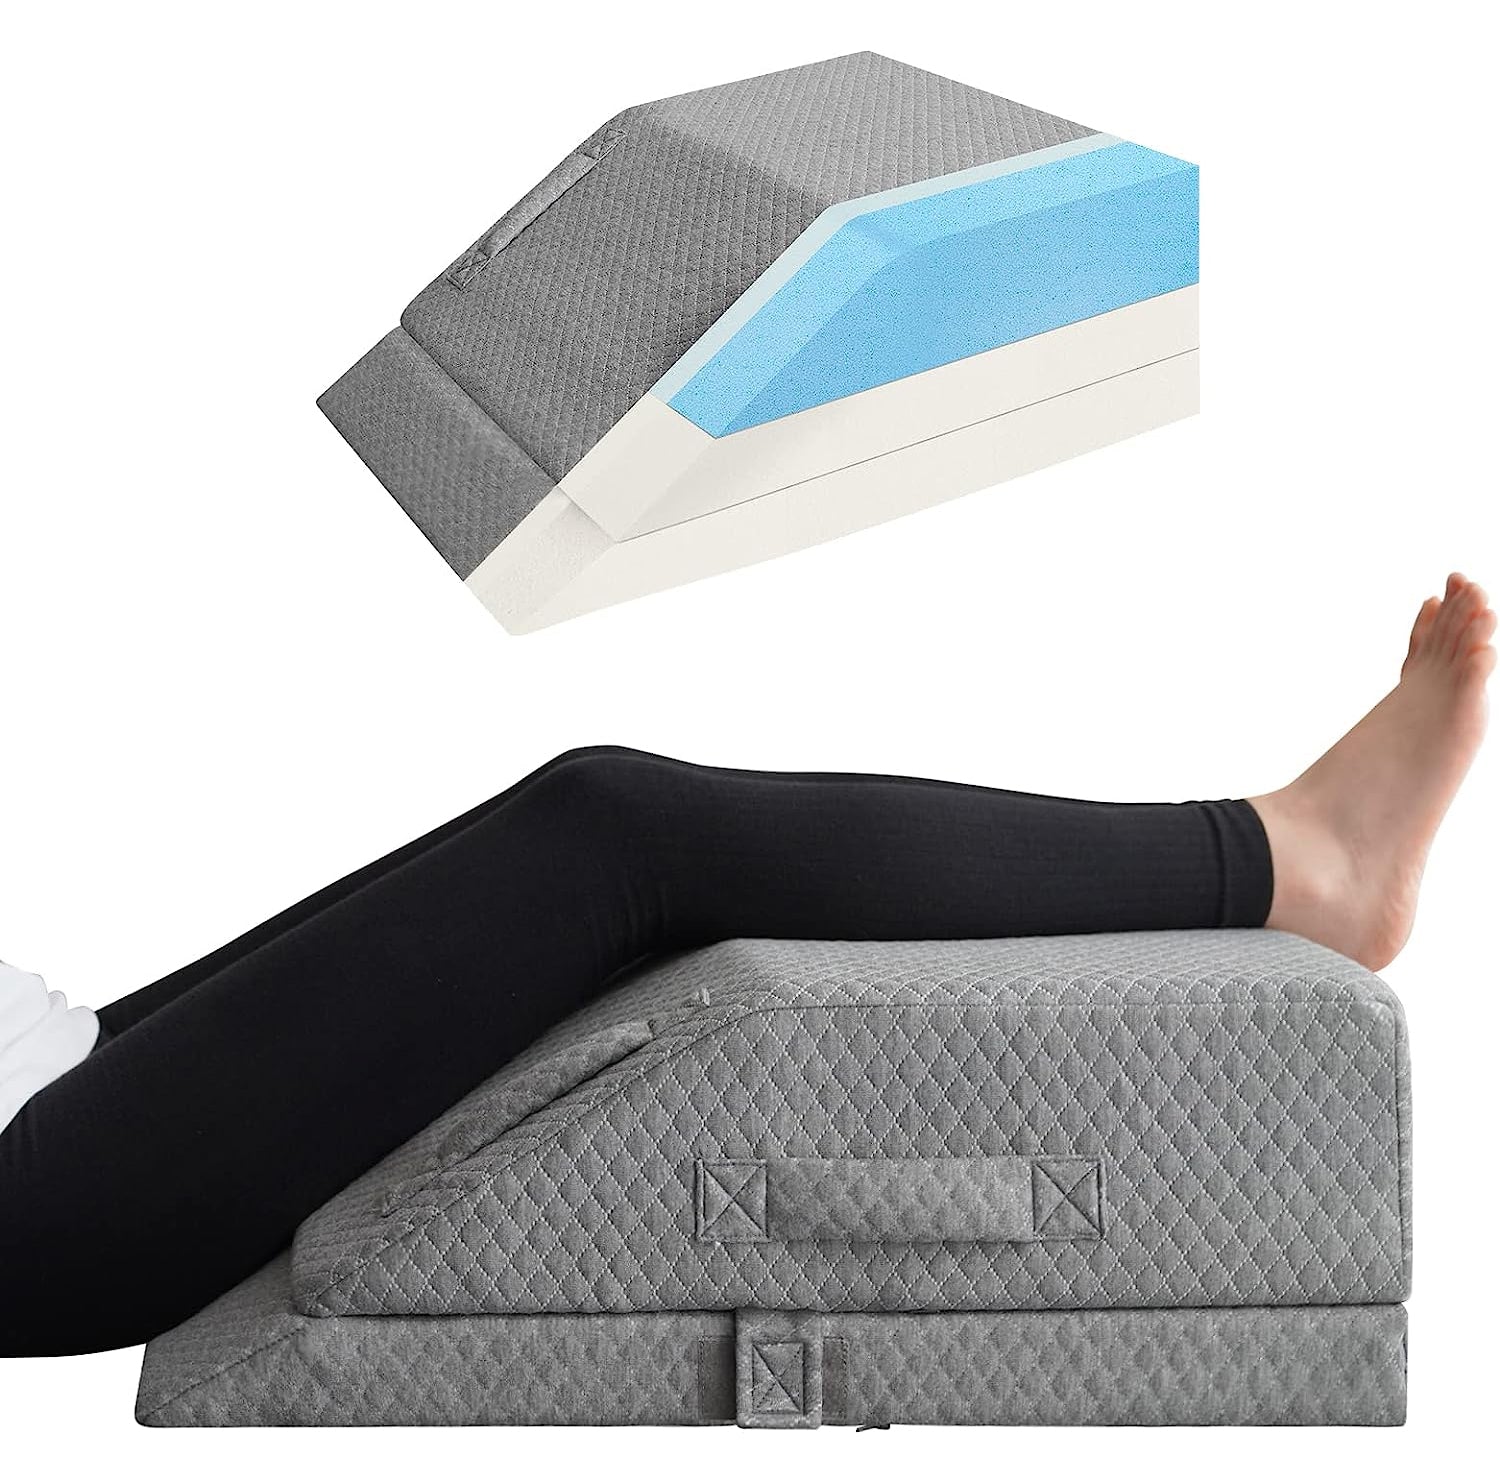 How to Use a Wedge Pillow: Bed Wedge Pillow Benefits  Wedge pillow, Bed  wedge pillow, Leg elevation pillow